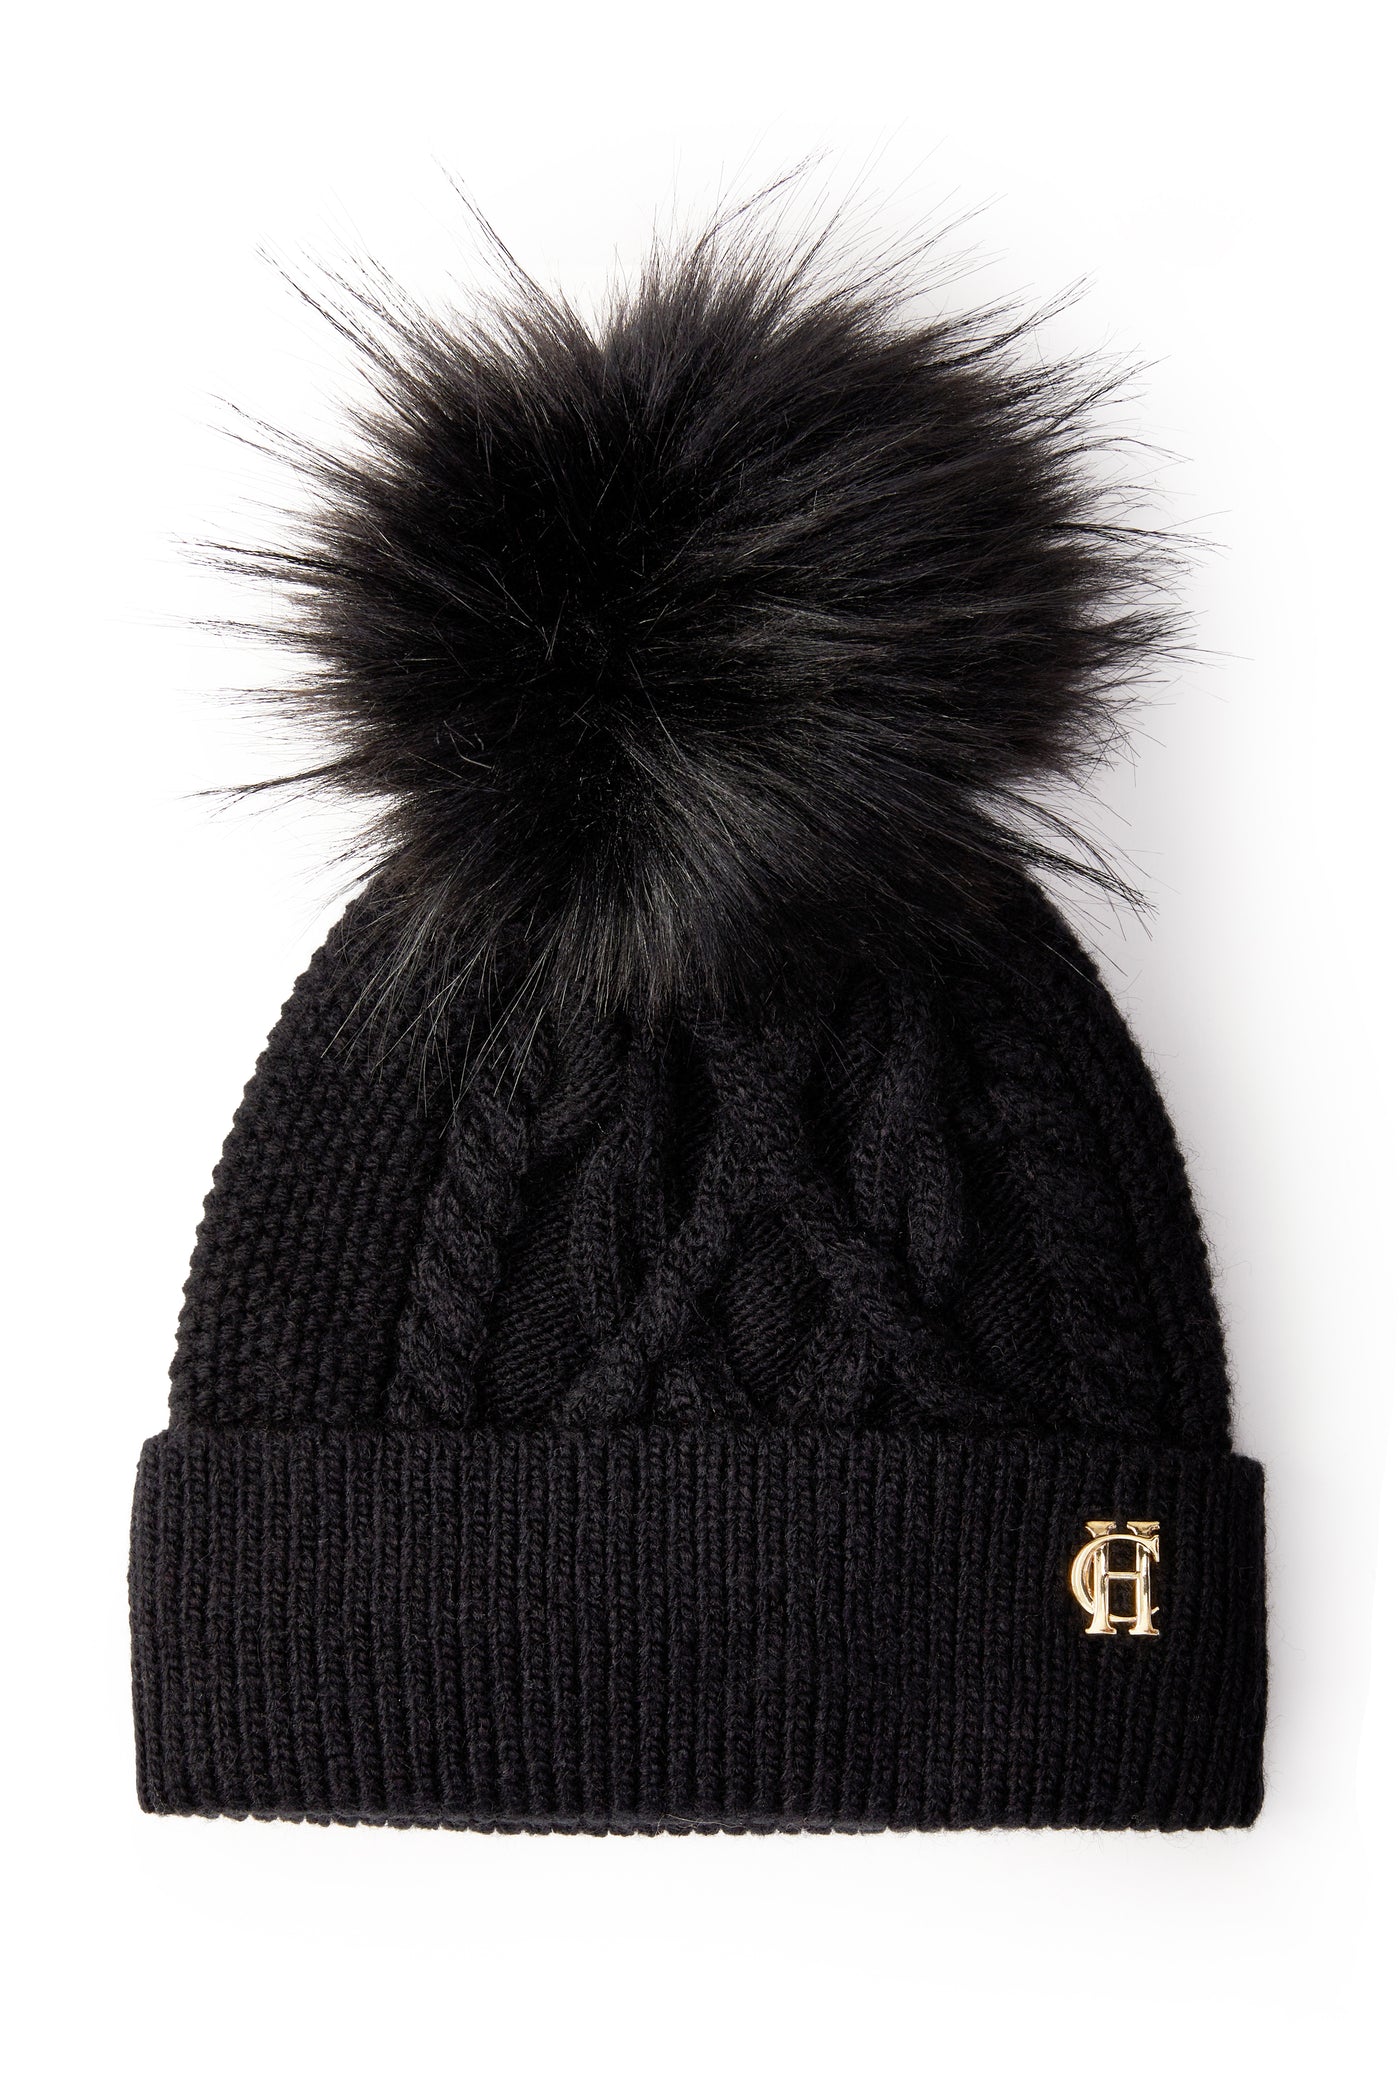 Holland Cooper Cortina Ladies Bobble Hat in Black Front